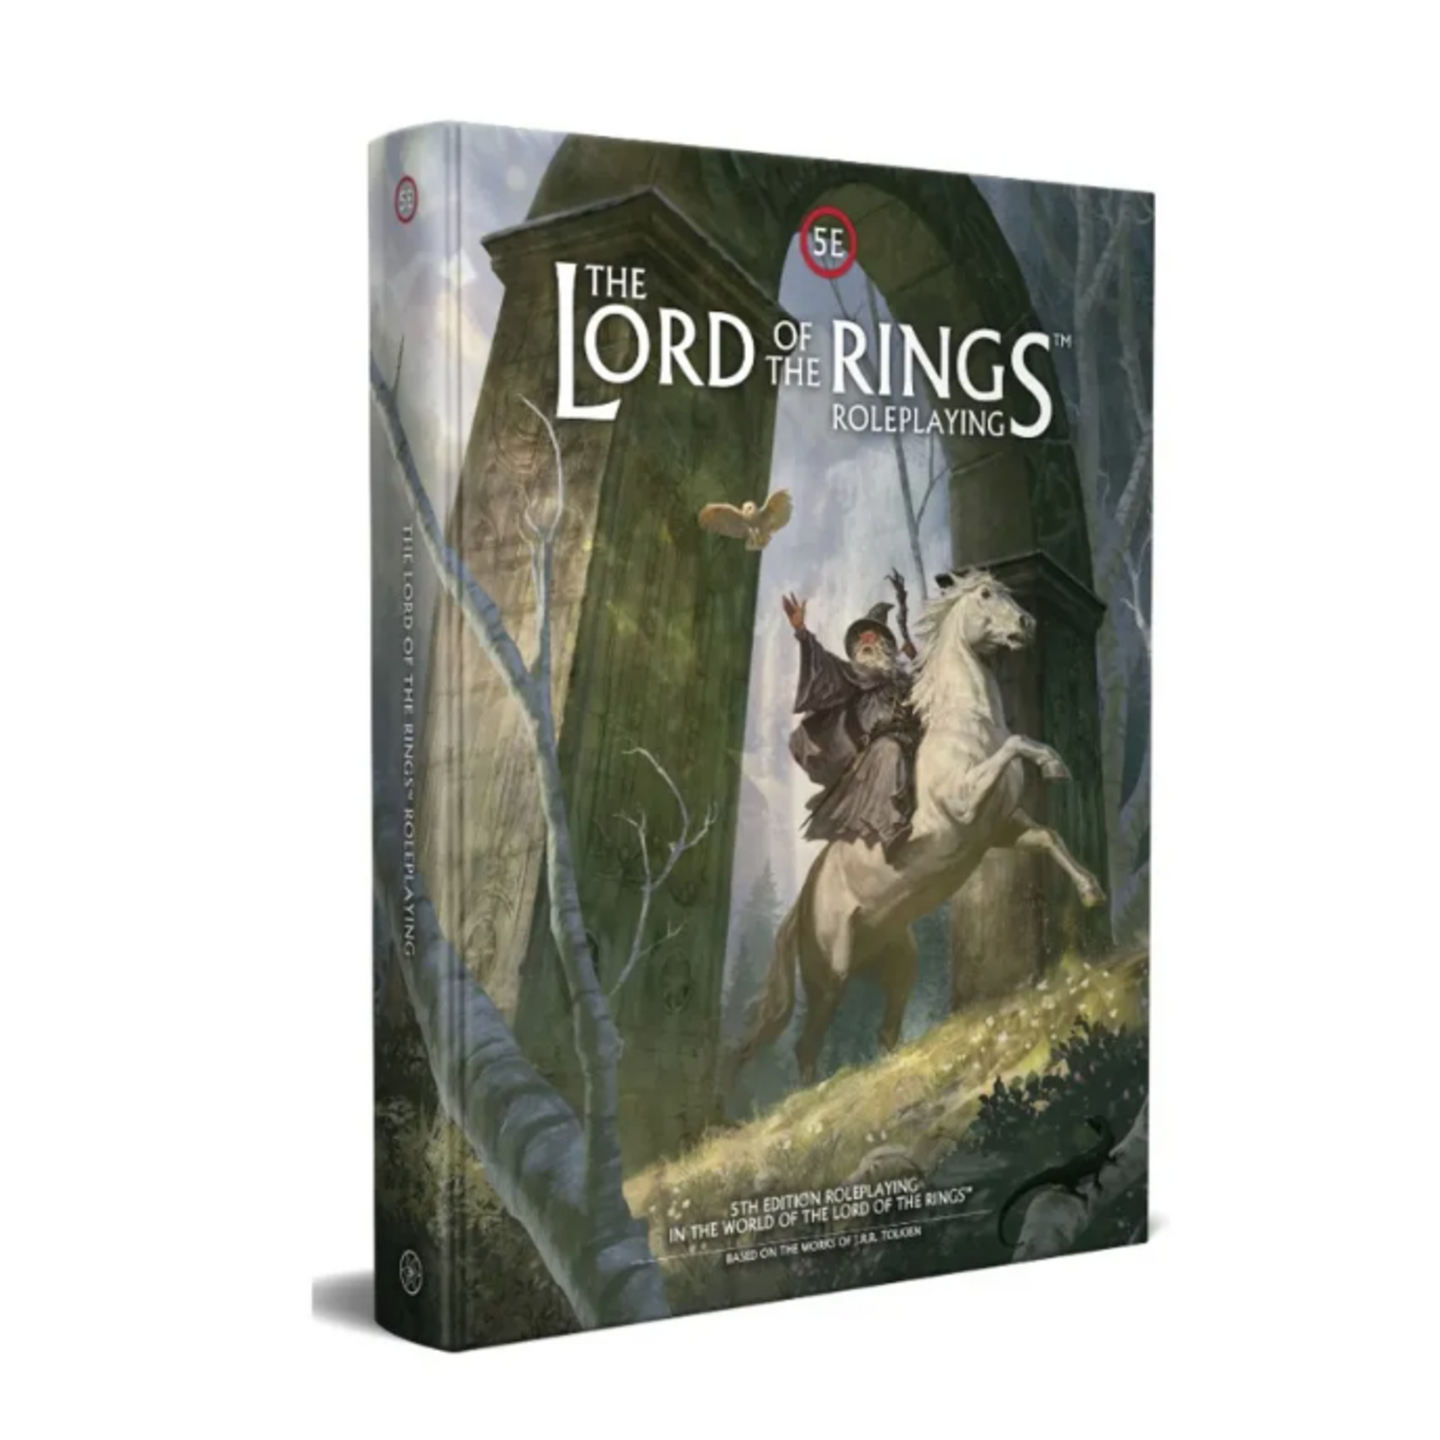 The Lord of the Rings Roleplaying Game – Core Rulebook (5th Edition)